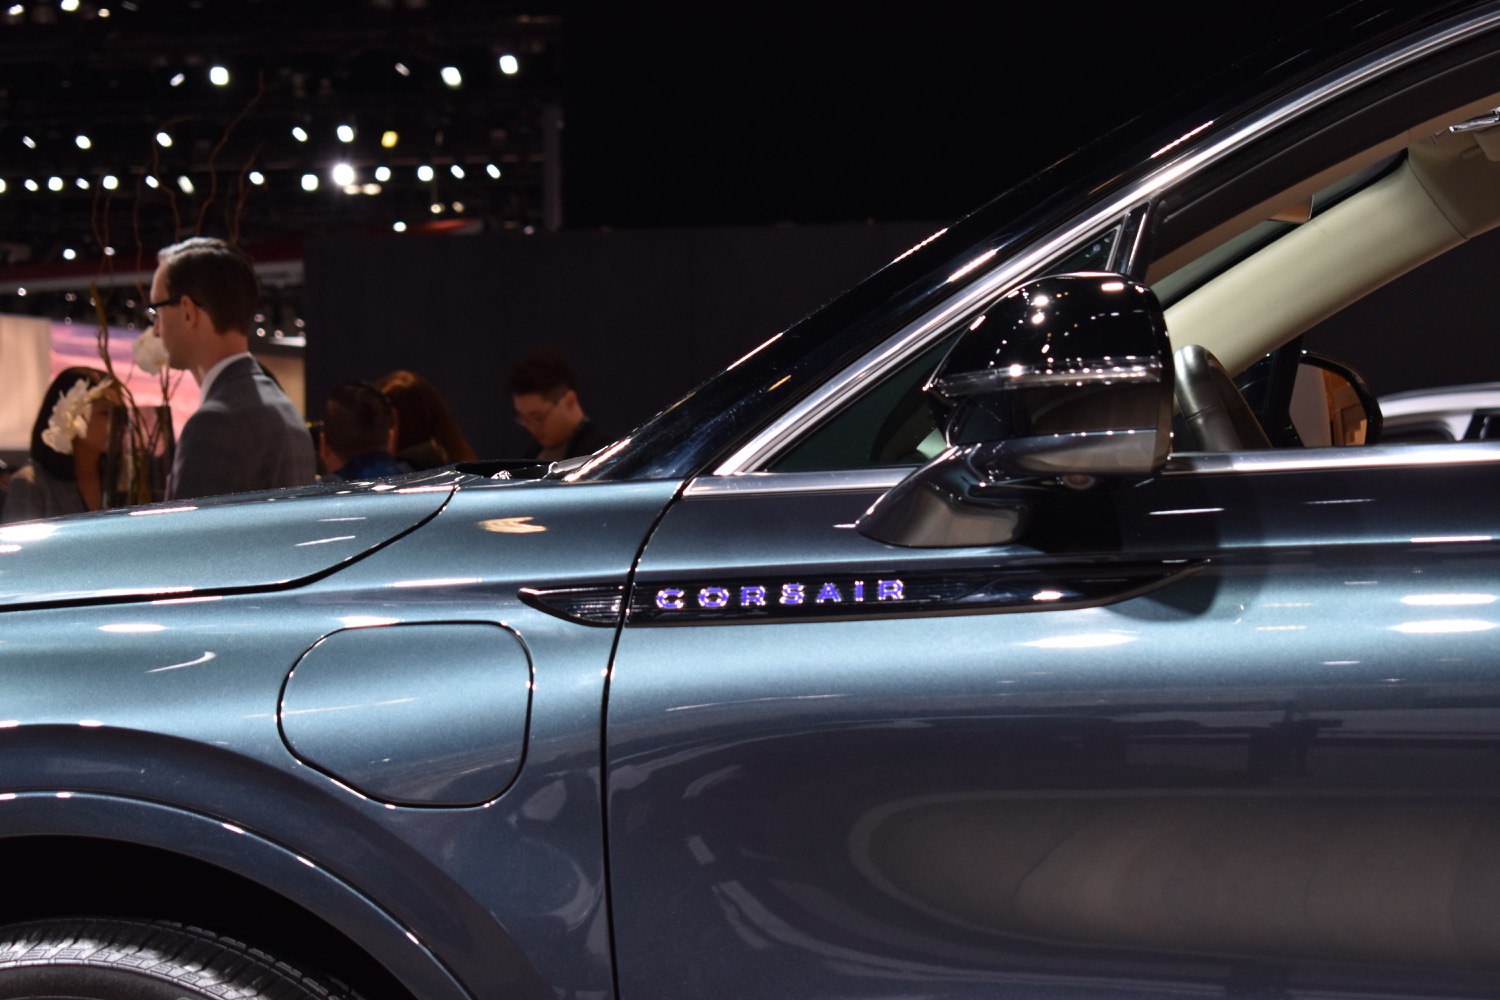 lincoln corsair grand touring plug in hybrid 2019 los angeles auto show